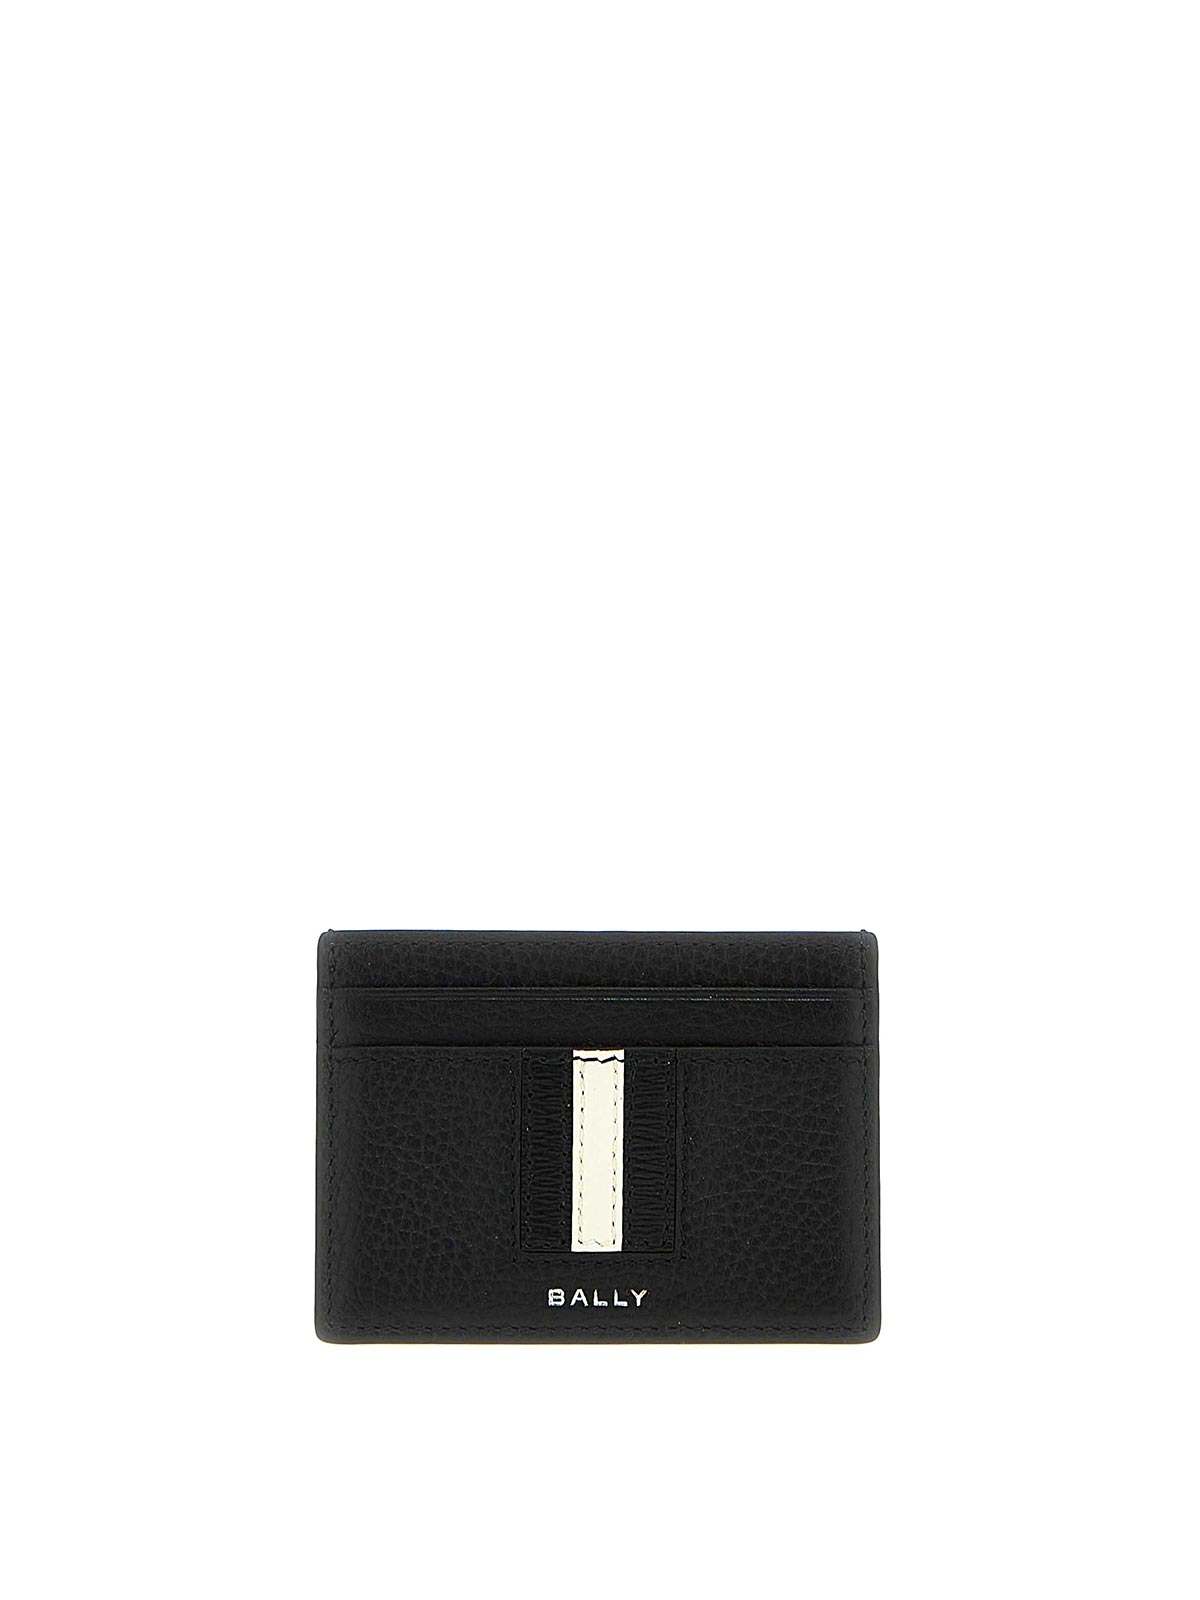 Bally Leather Cardholder In Black